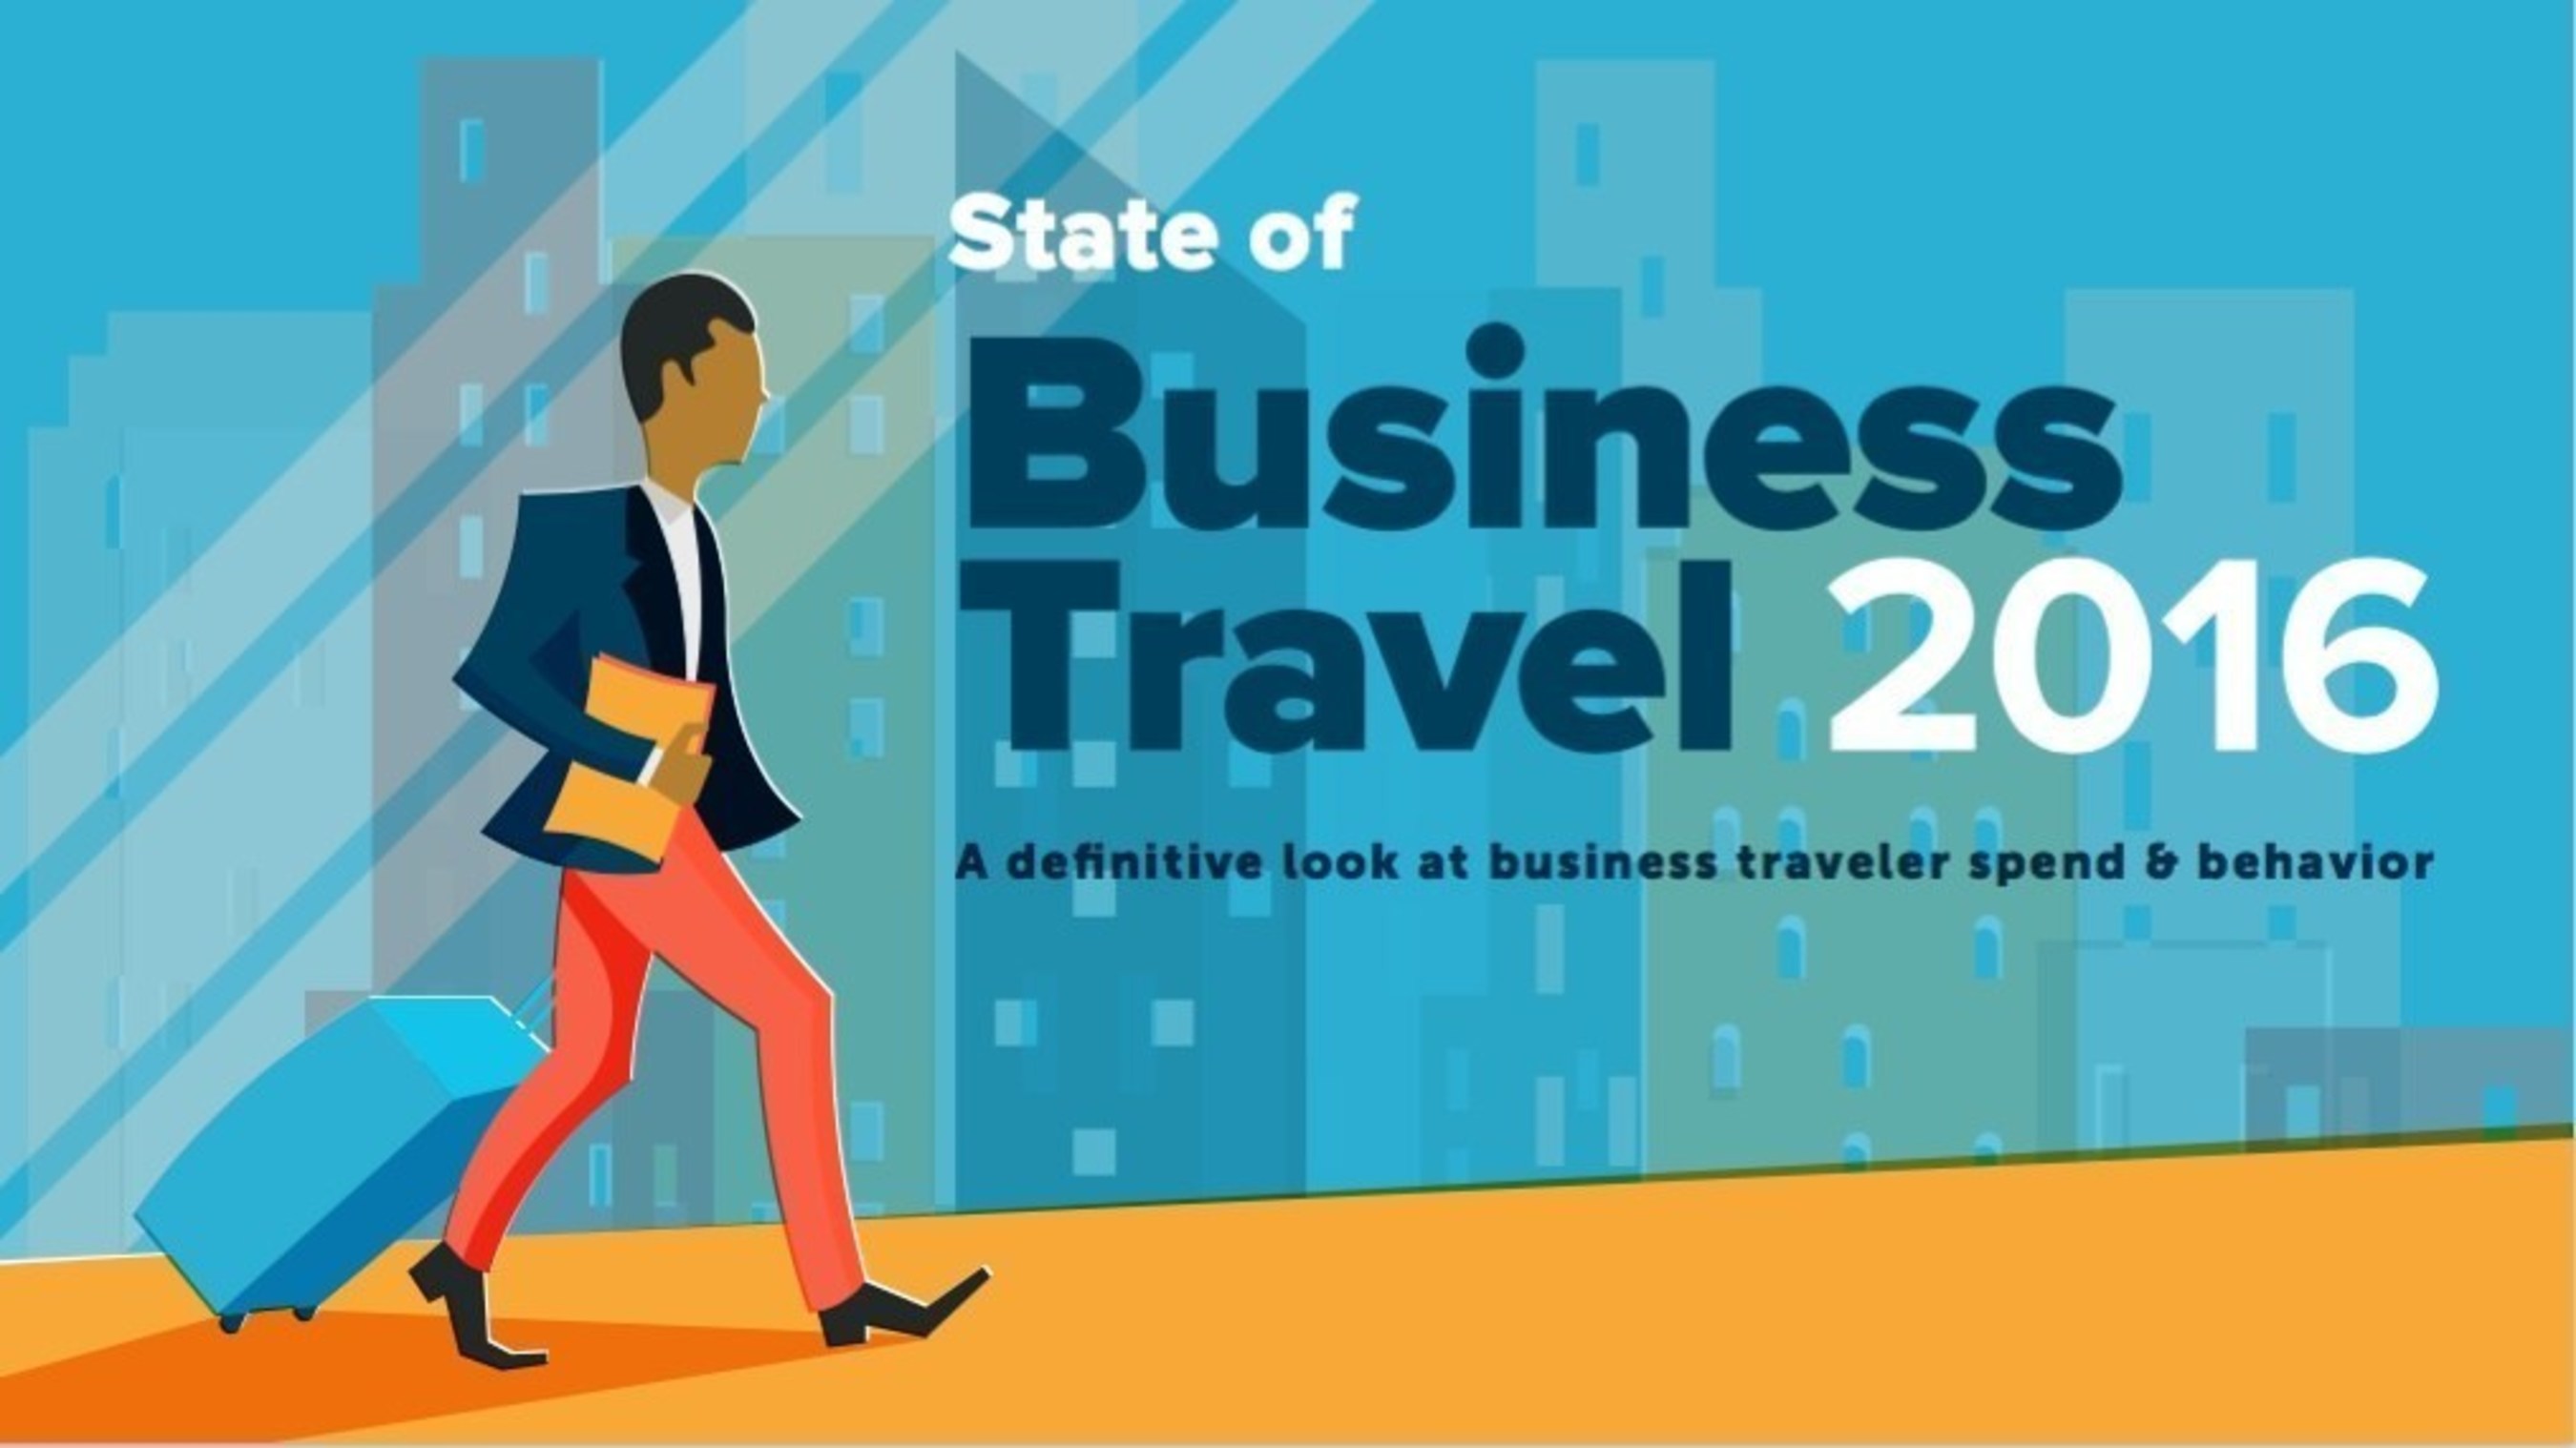 Concur Global Business Travel and Spend Report Reveals New Sharing Economy Trends, Business Traveler Behaviors